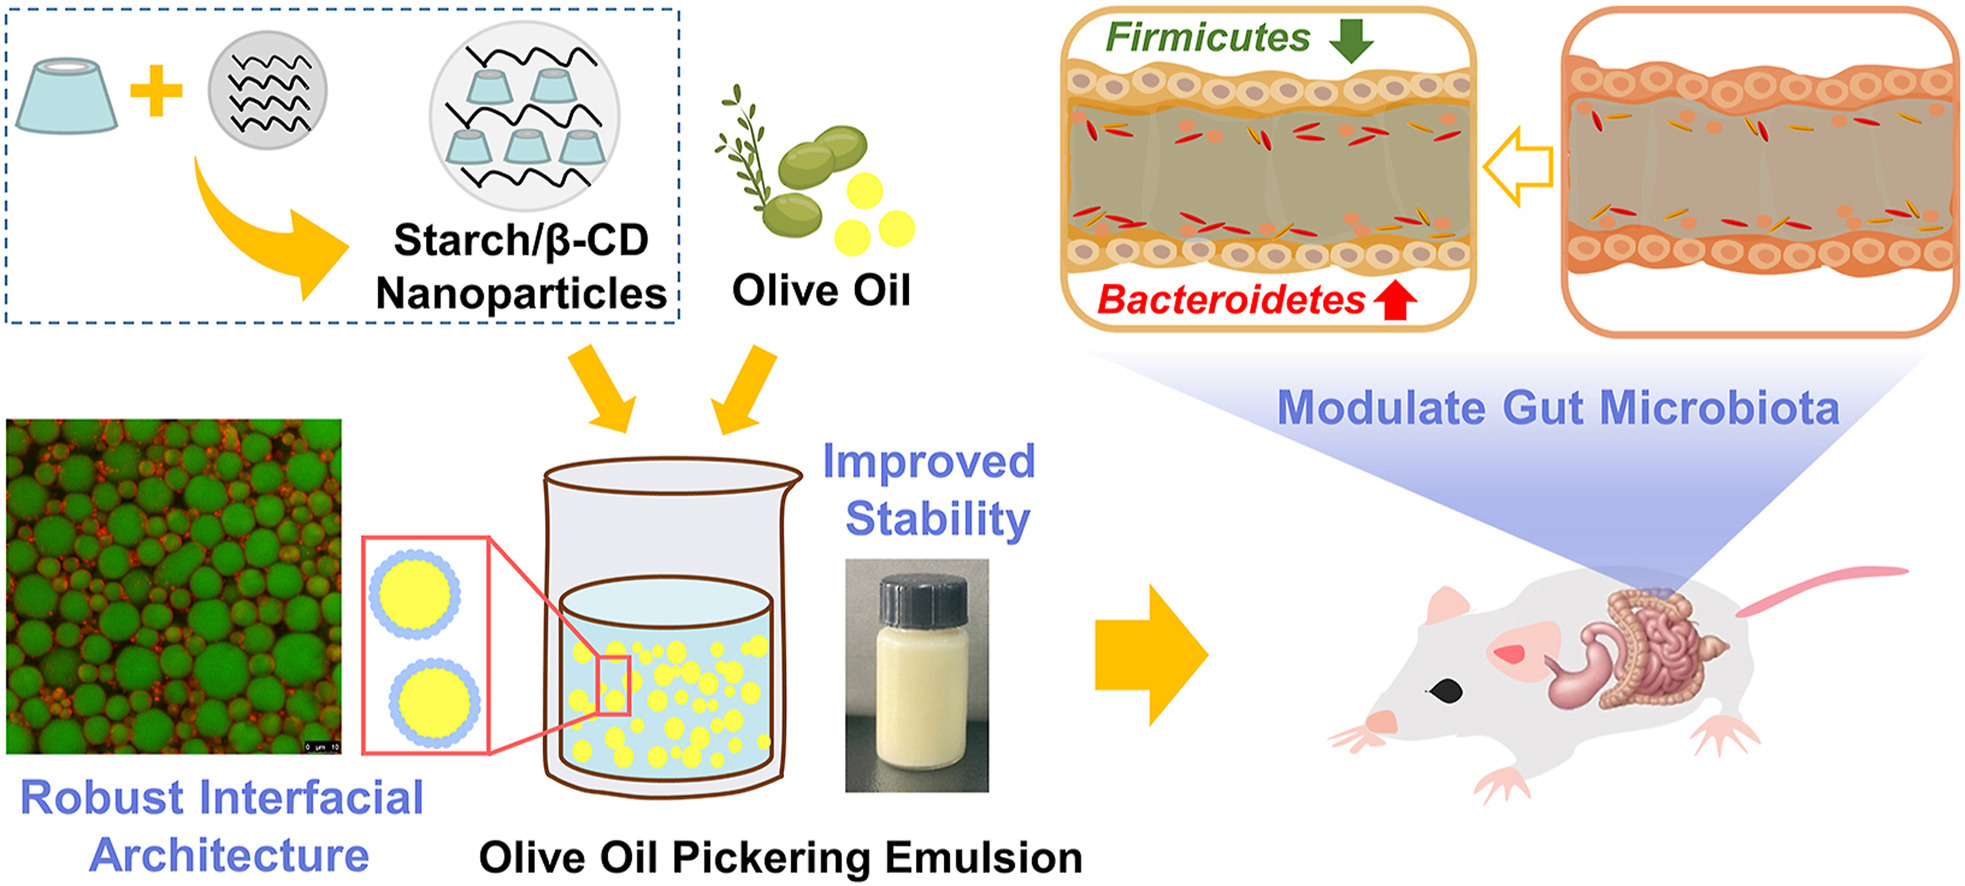 Recent advances in improving stability of food emulsion by plant